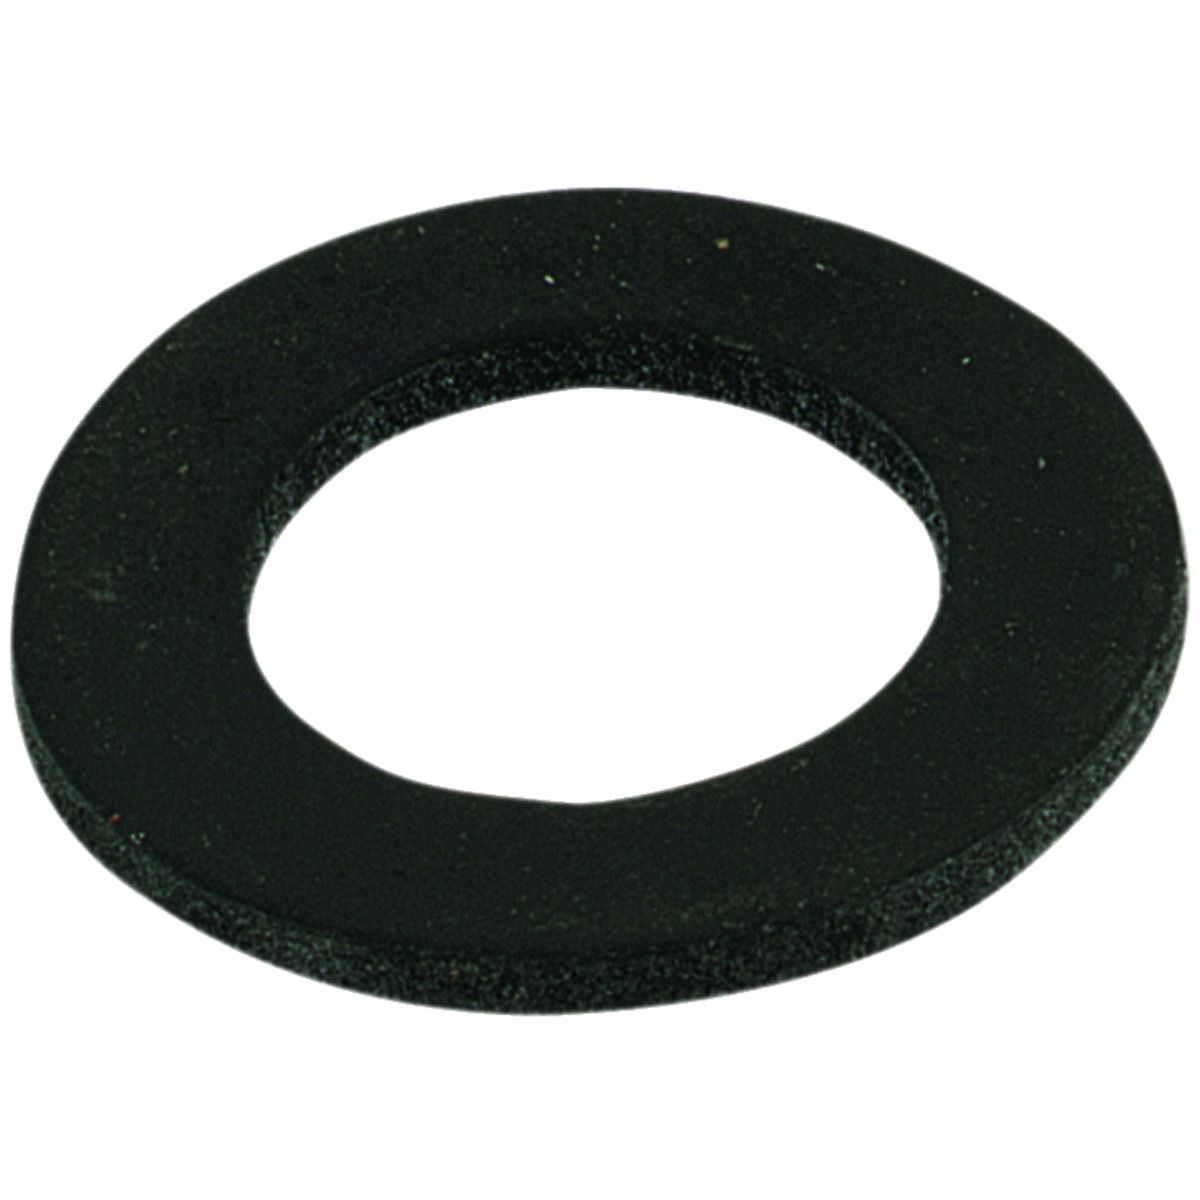 Image of Primaflow Hose Washers - 19mm Pack Of 5